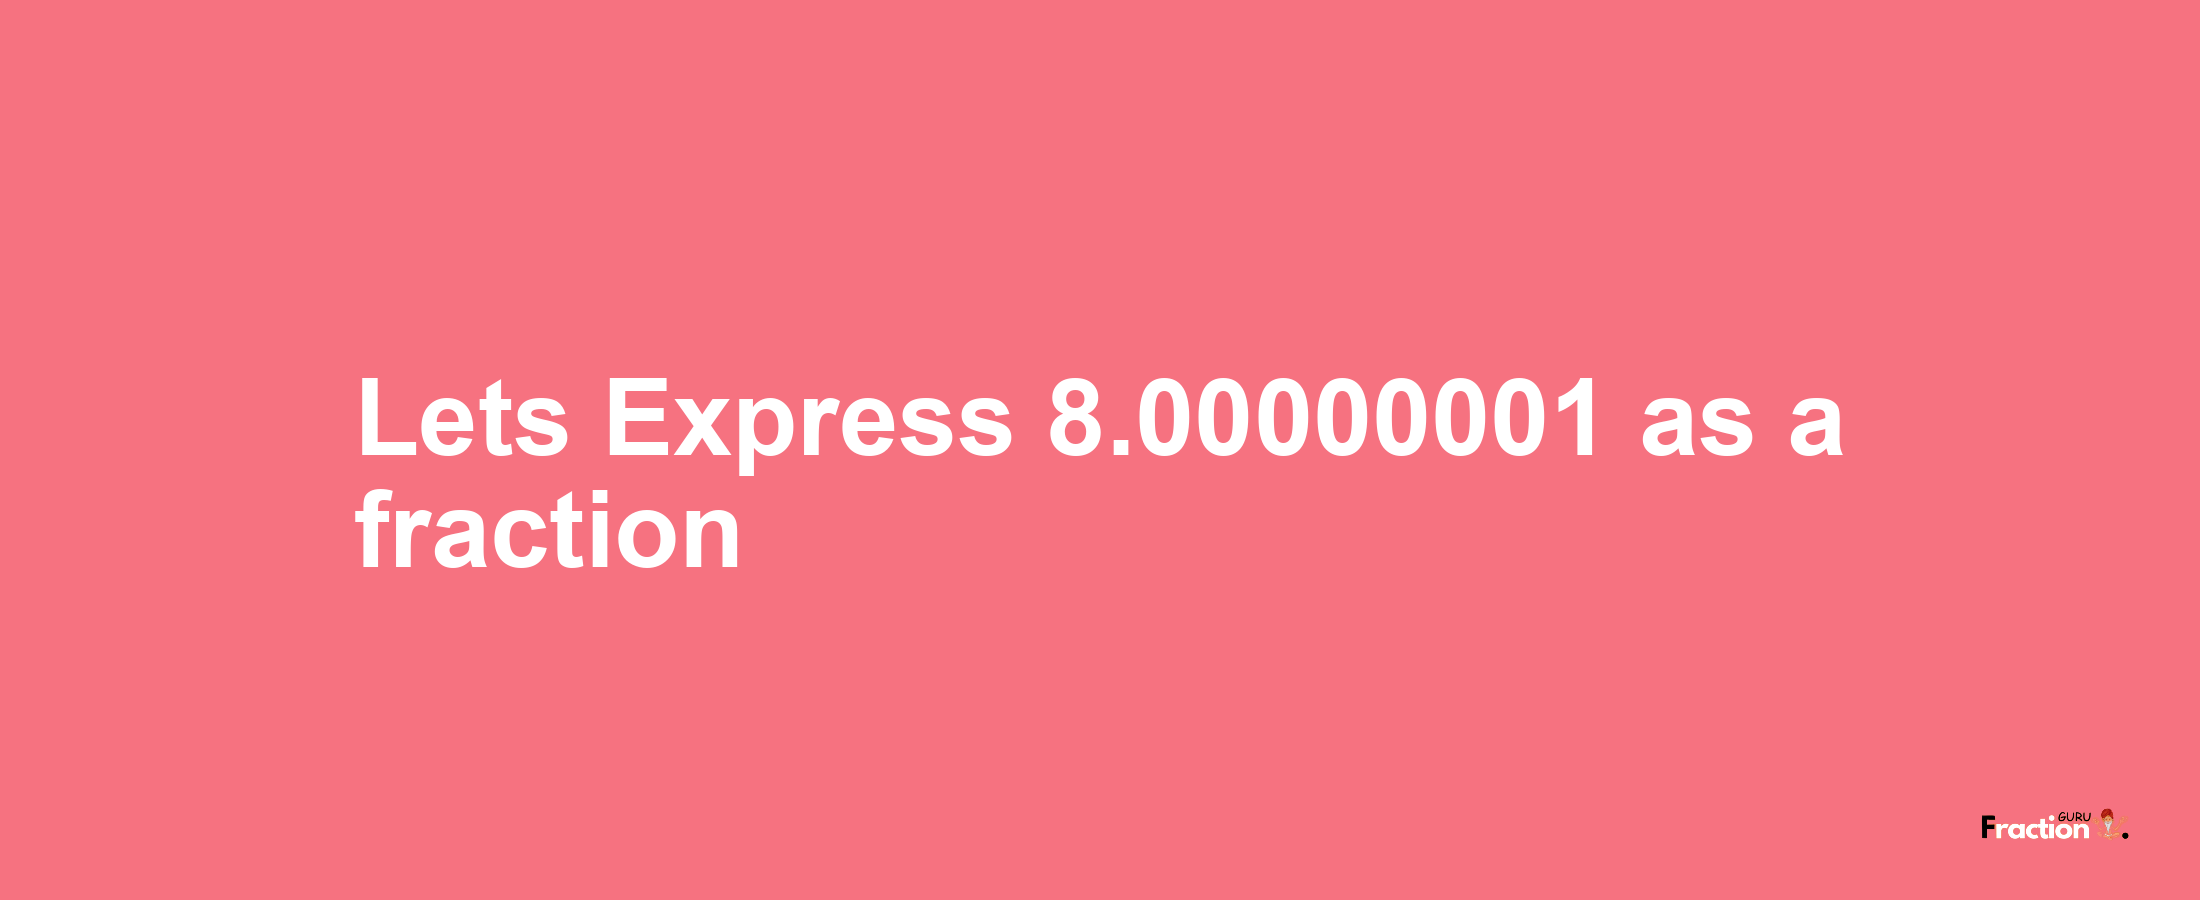 Lets Express 8.00000001 as afraction